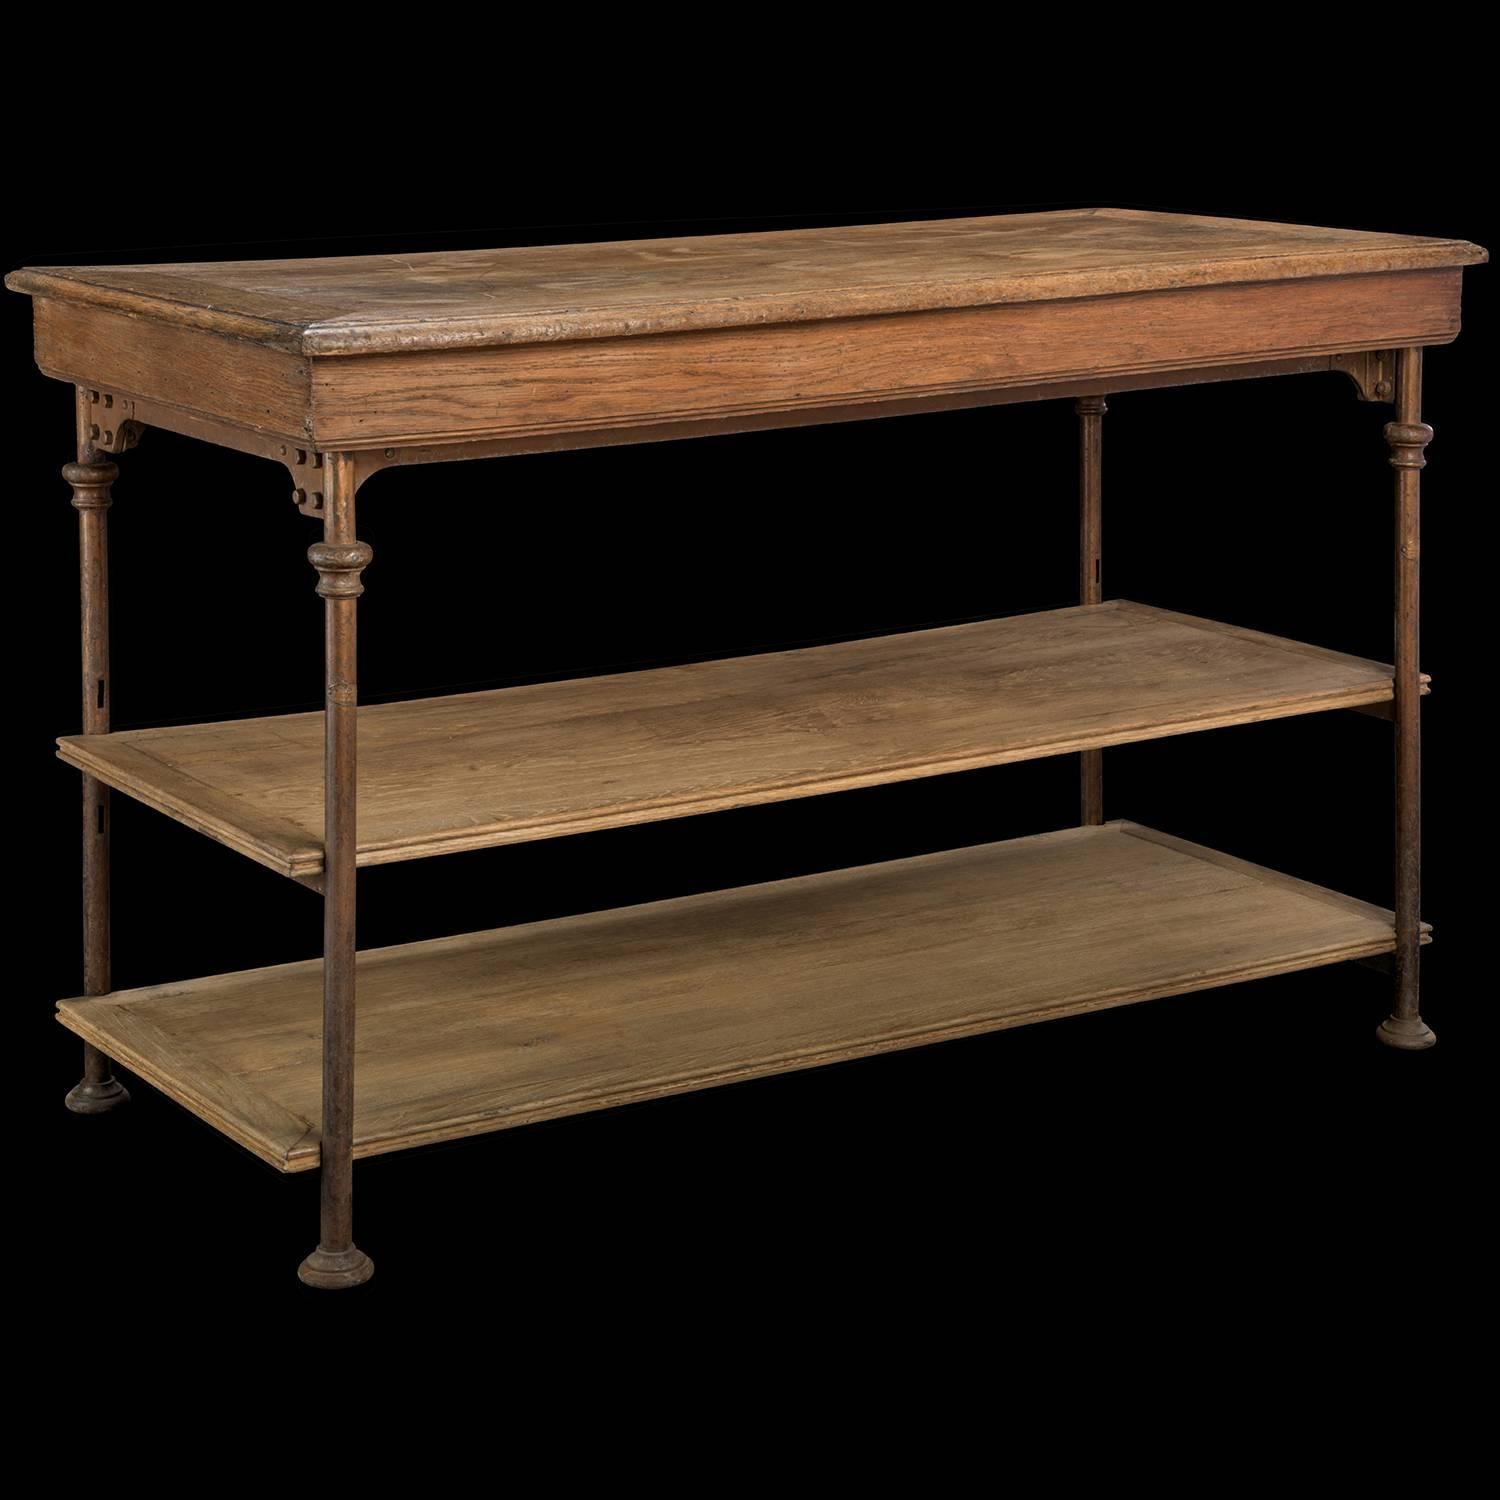 French Theodore Scherf Oak and Iron Drapers Tables, circa 1890